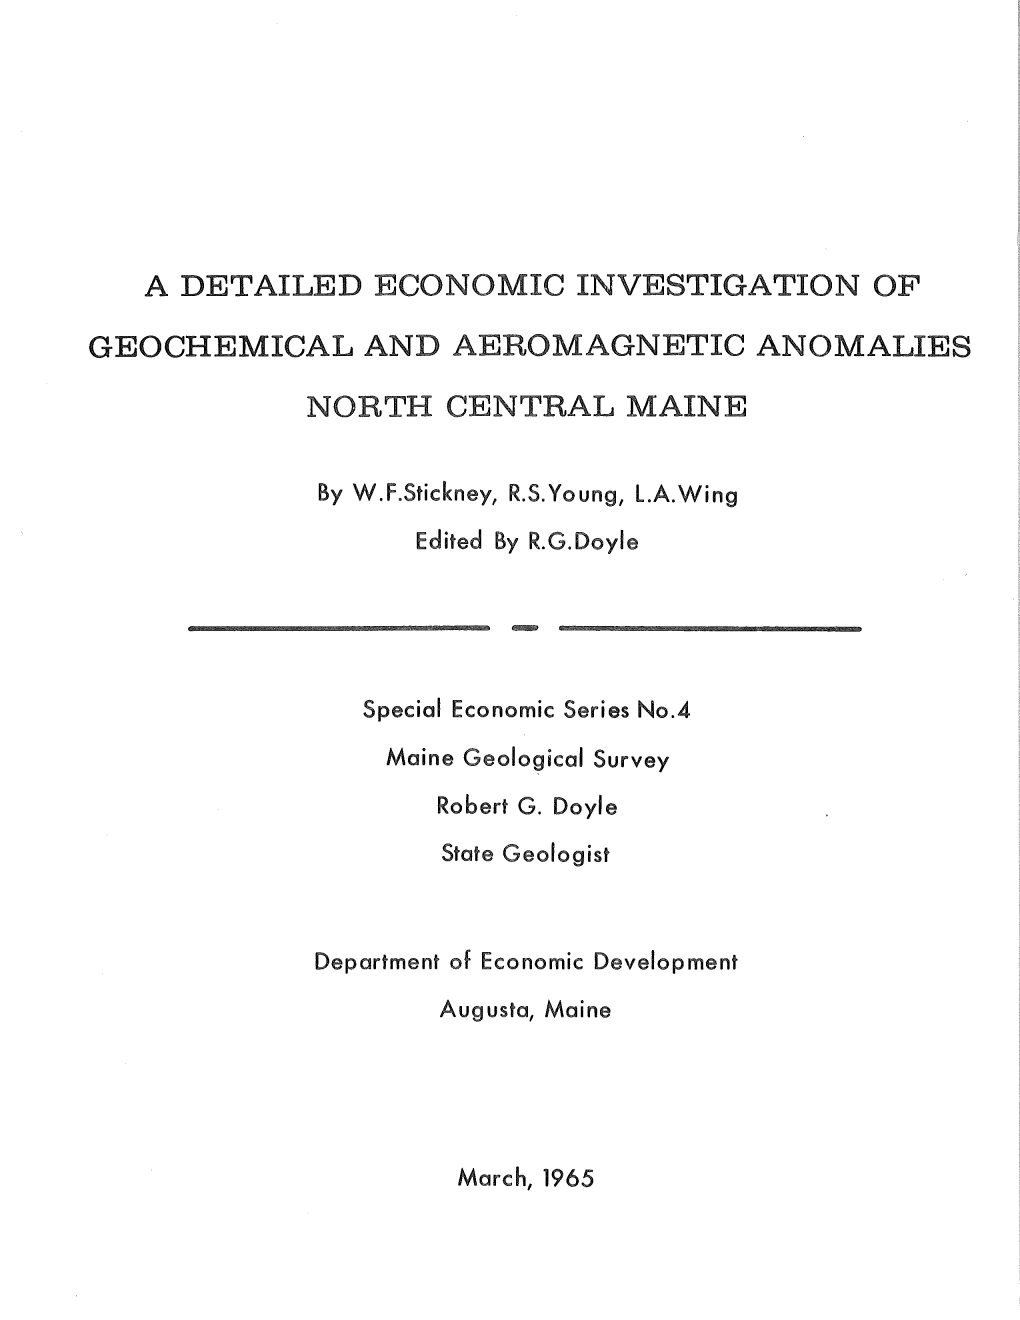 A Detailed Economic Investigation of Geochemical and Aeromagnetic Anomalies North Central Maine